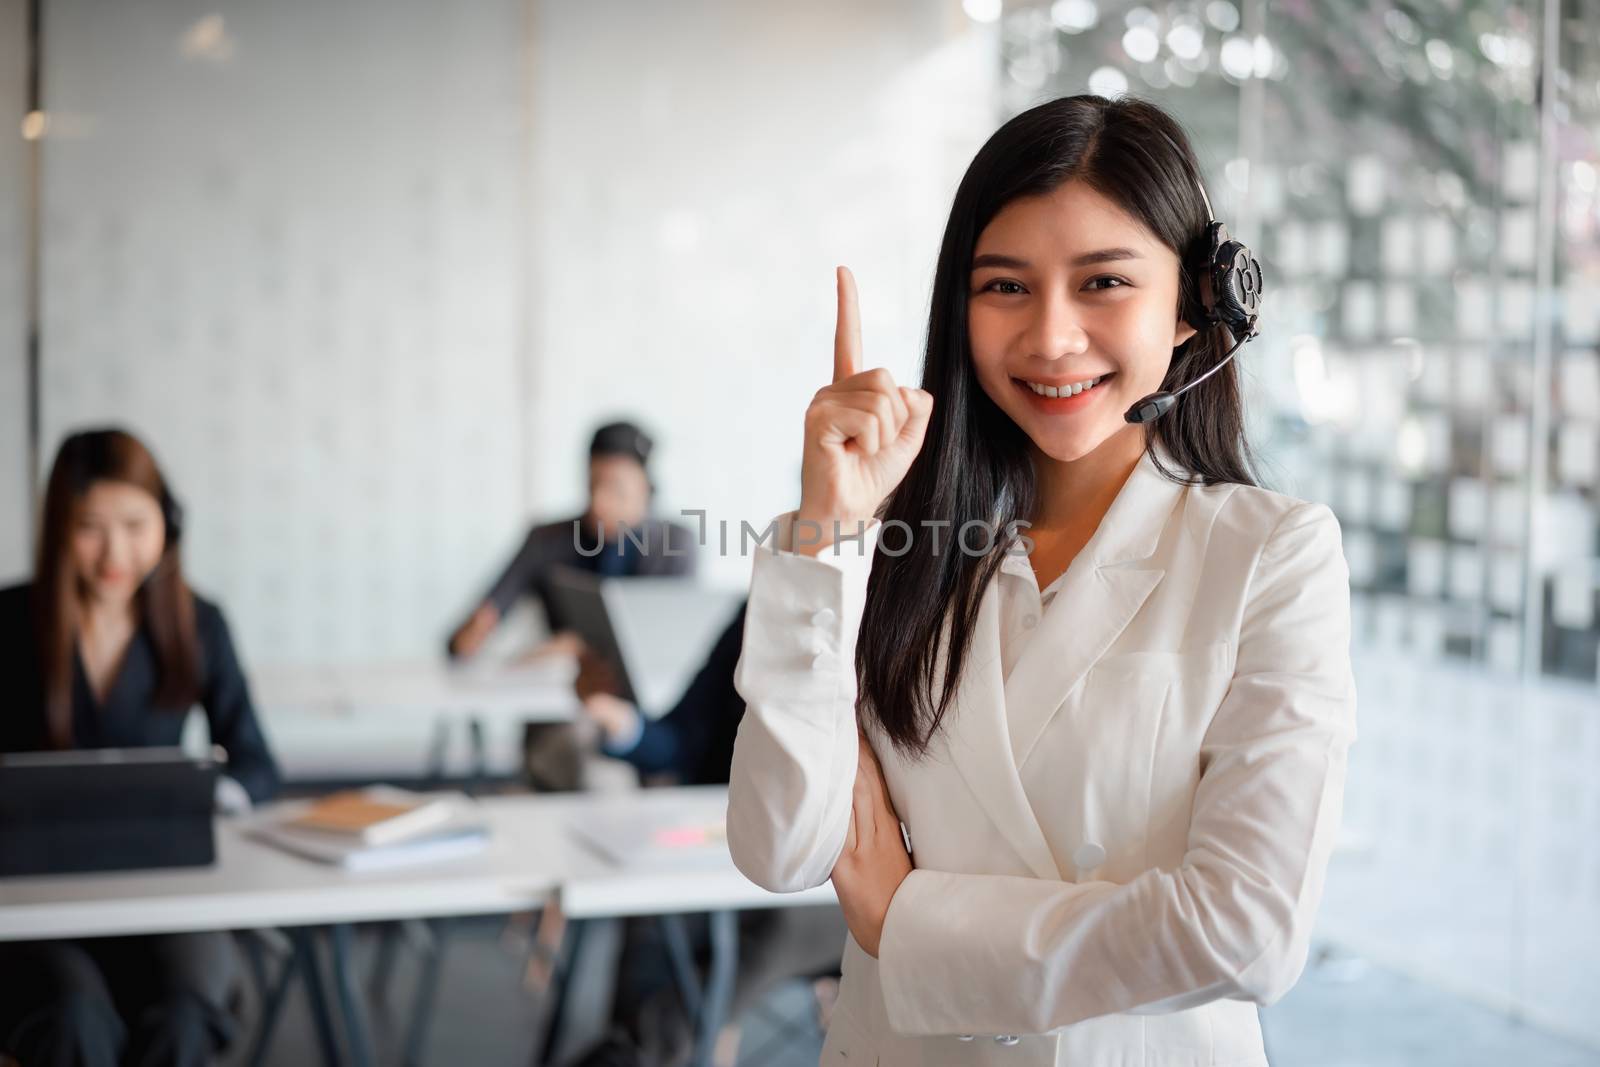 Confident female customer services agent with headset working in a call center office. Customer service team support concept by kenchiro75